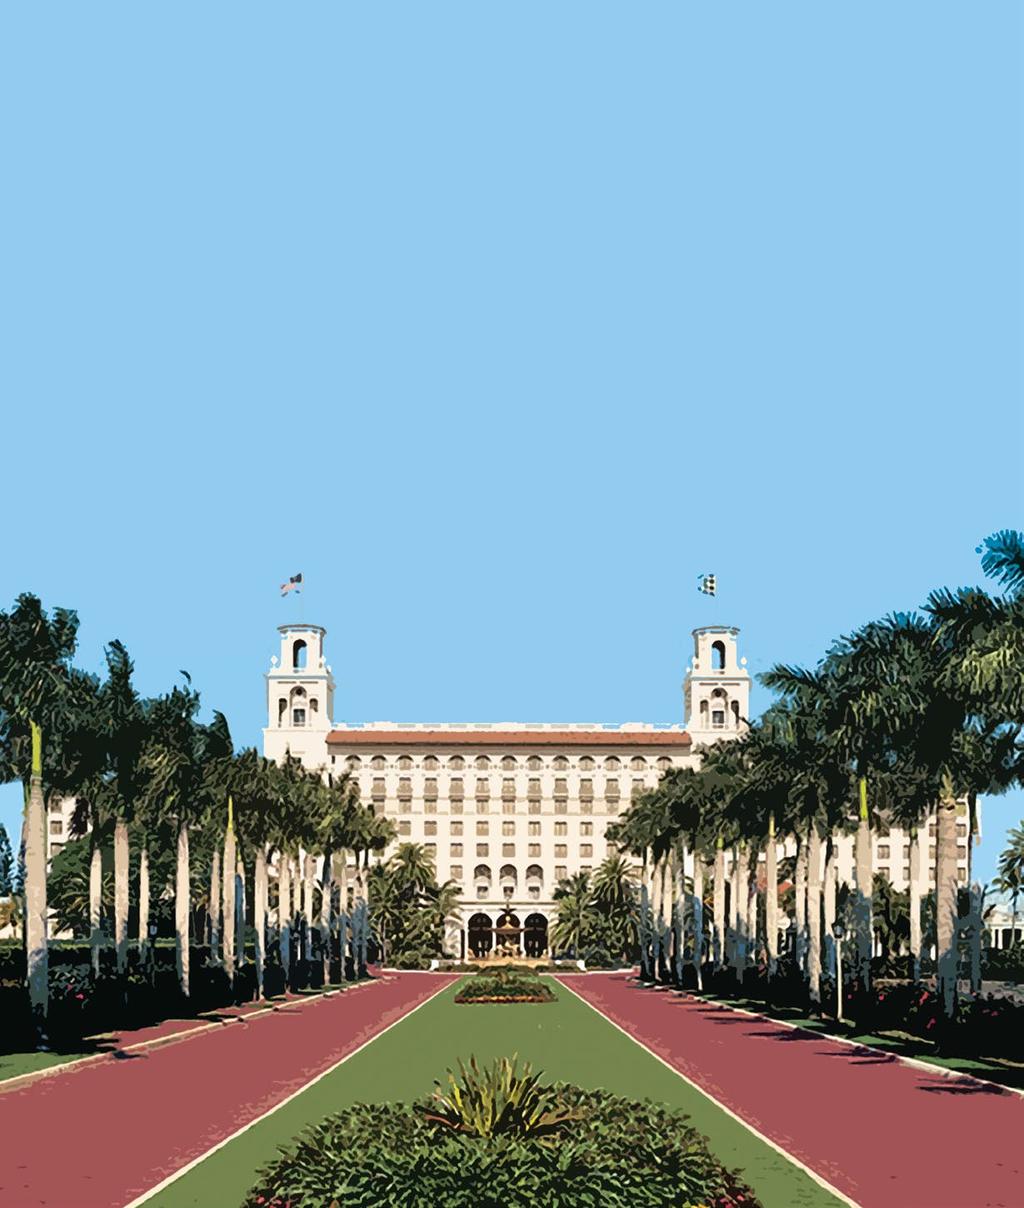 WWW.FSAHQ.ORG THE FLORIDA SOCIETY OF ANESTHESIOLOGISTS ANNUAL MEETING & WORKSHOPS June 8-10, 2018 The Breakers Palm Beach, Florida PRESIDENT: D.